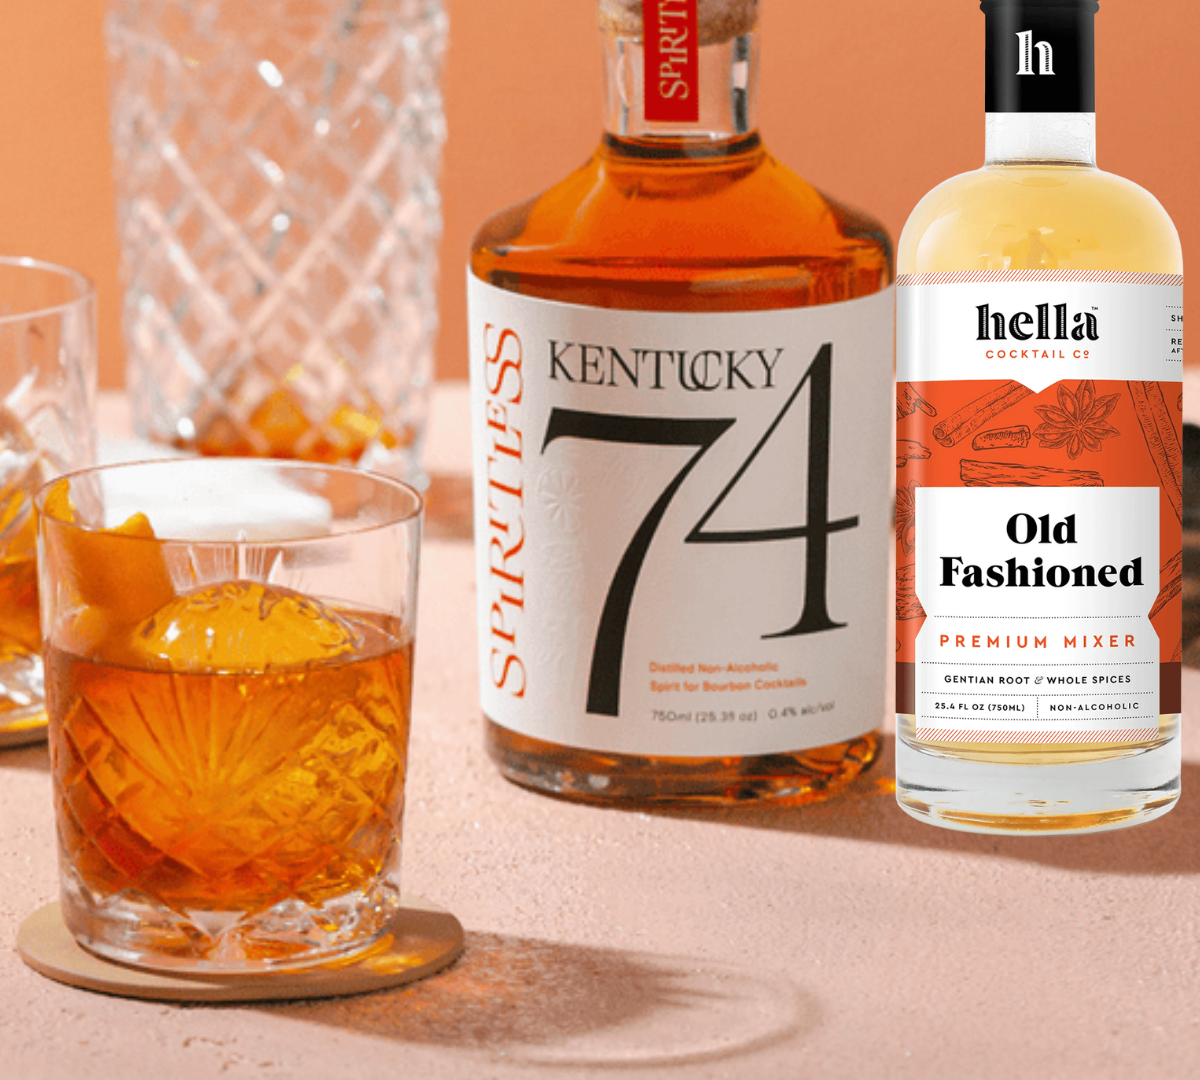 The Old Fashioned Cocktail Gift Set